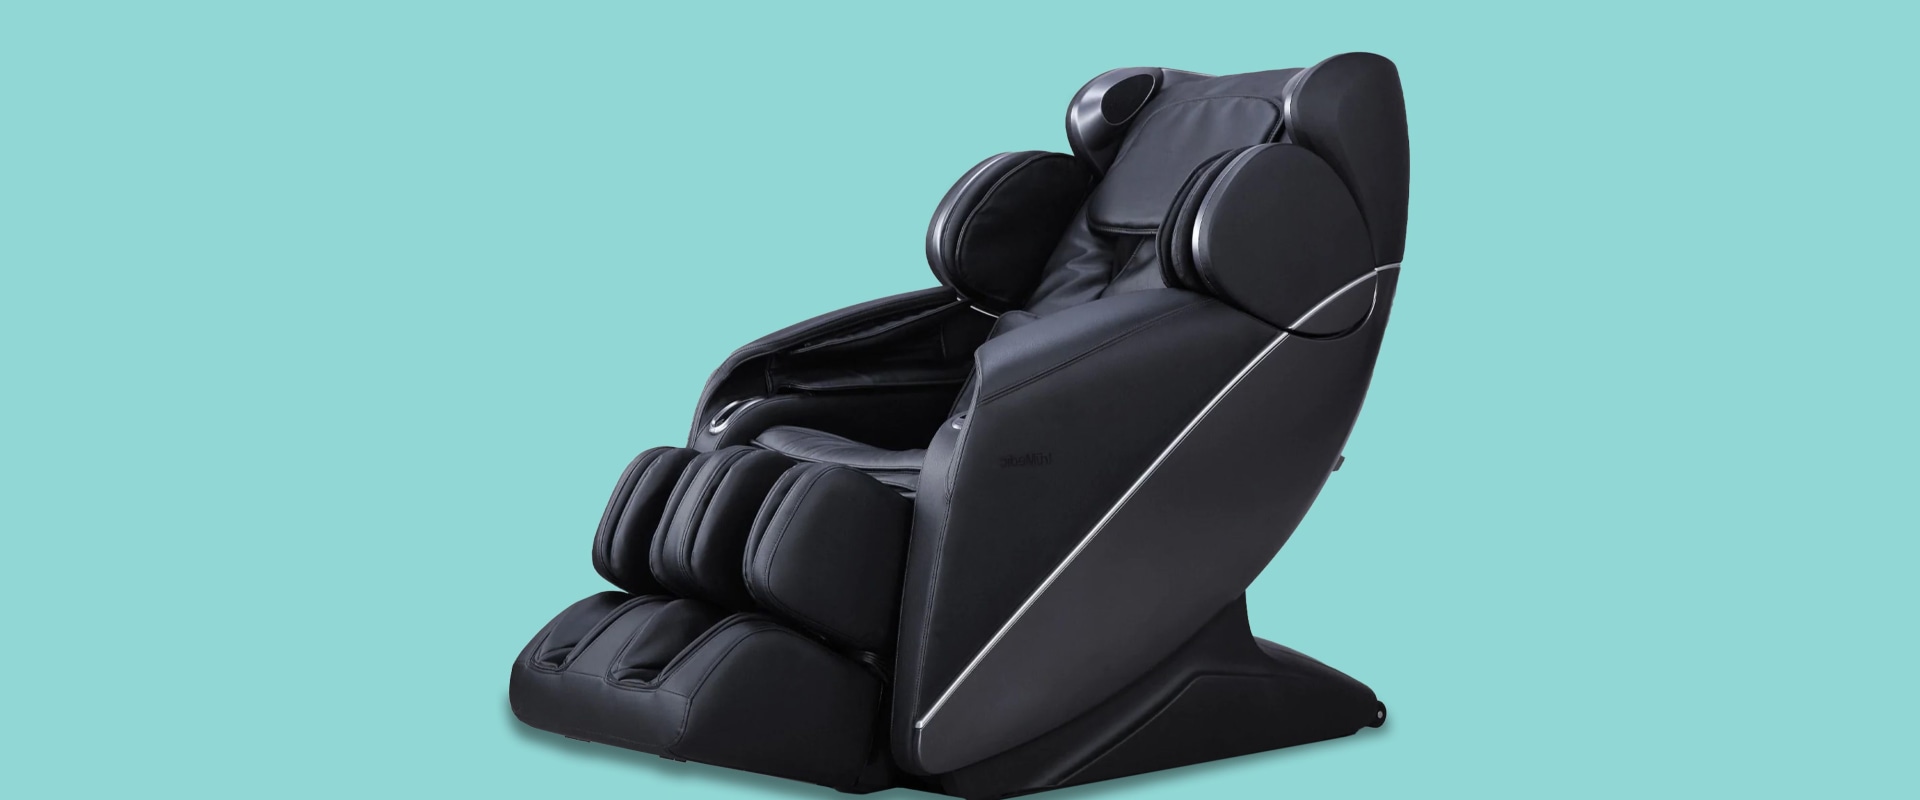 The Best Massage Chairs for Relaxation and Pain Relief